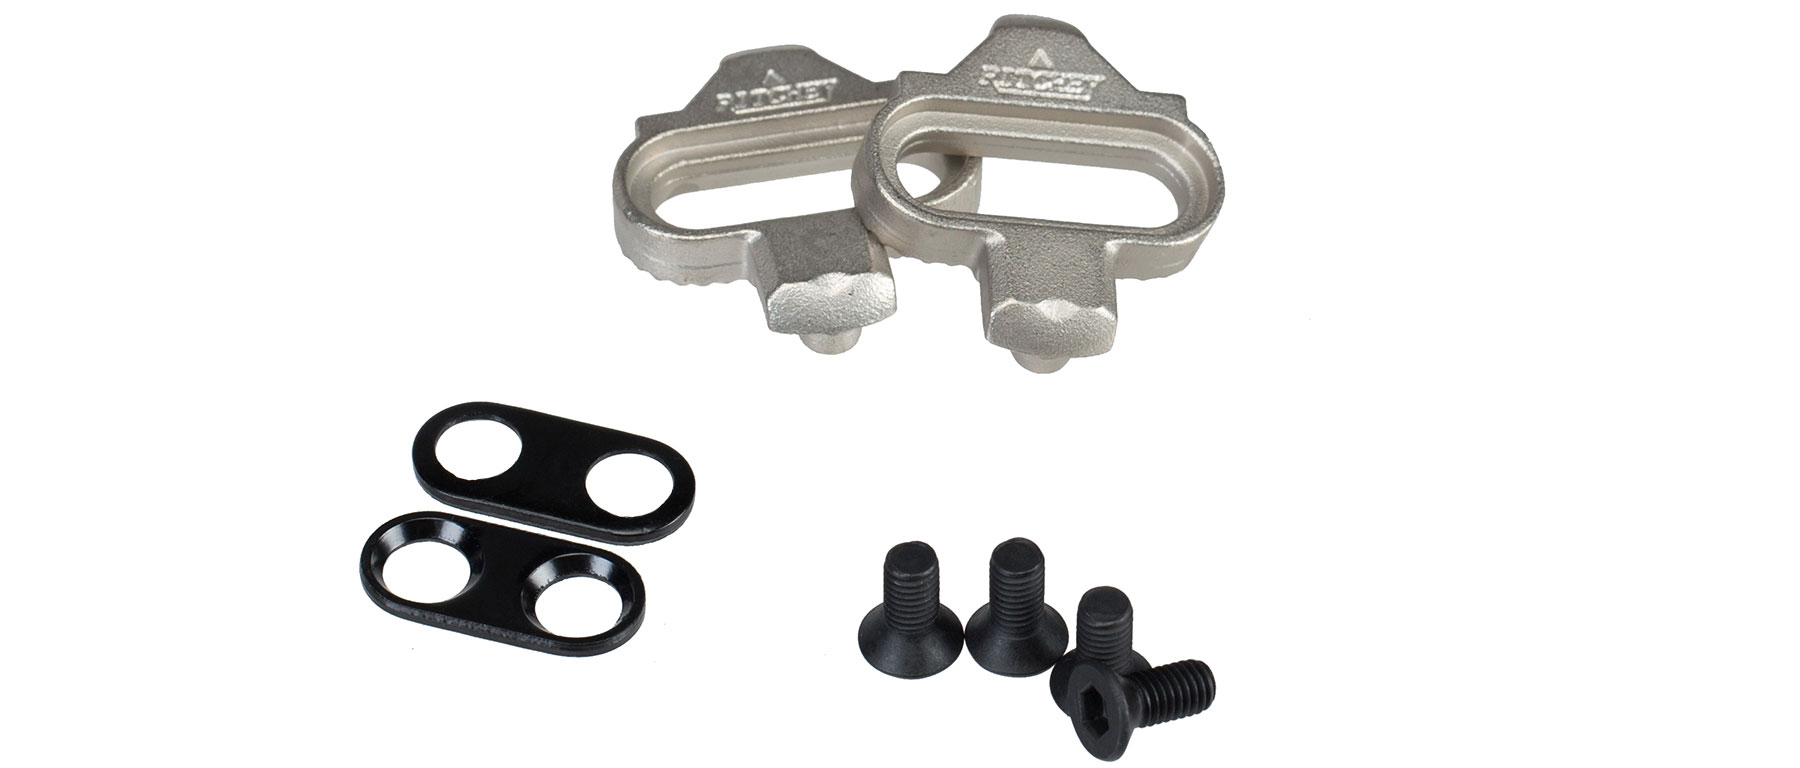 Ritchey WCS Mountain Pedal Cleats